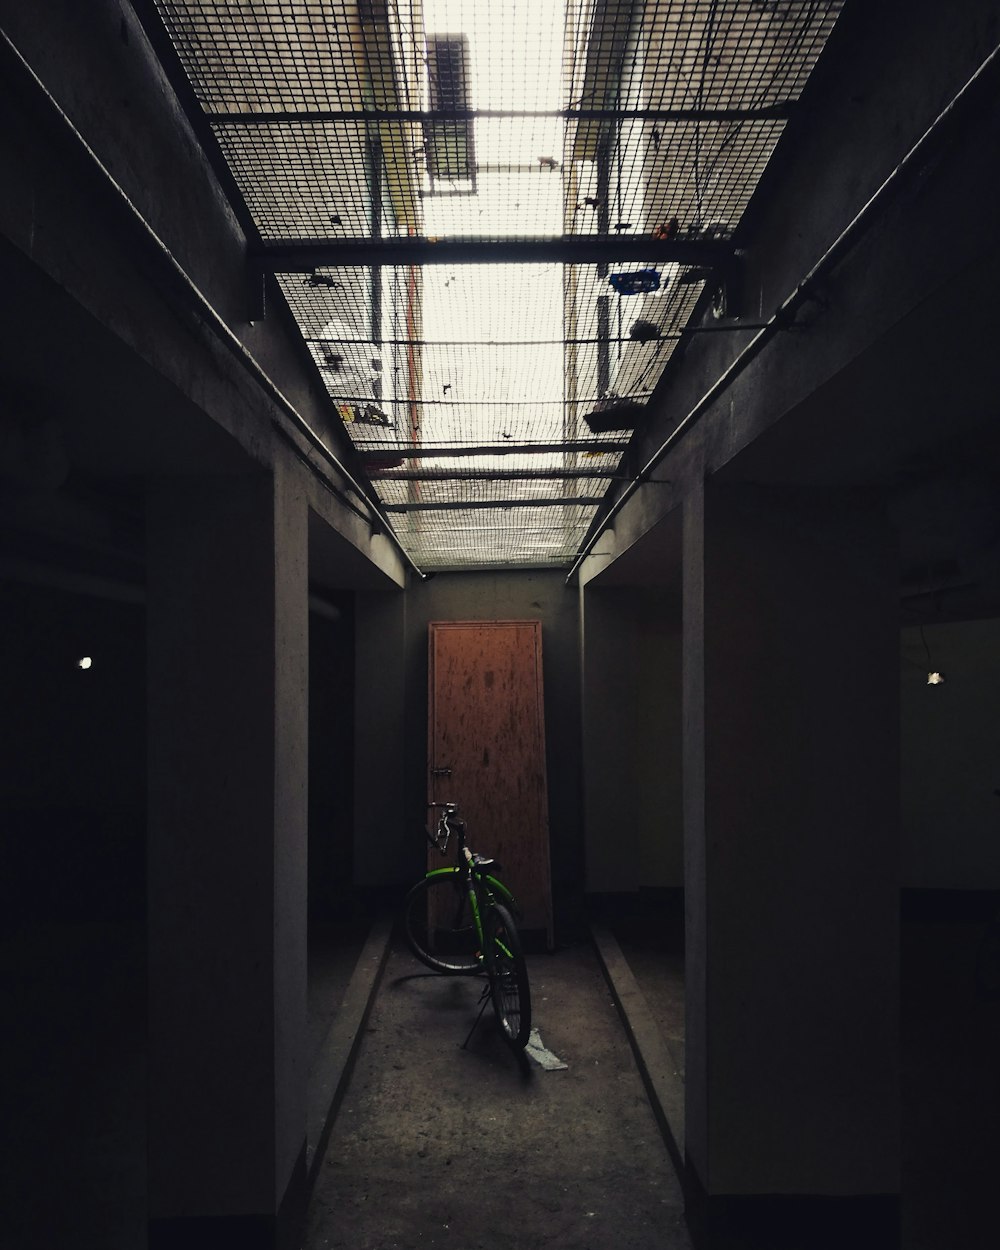 green bicycle parked on hallway